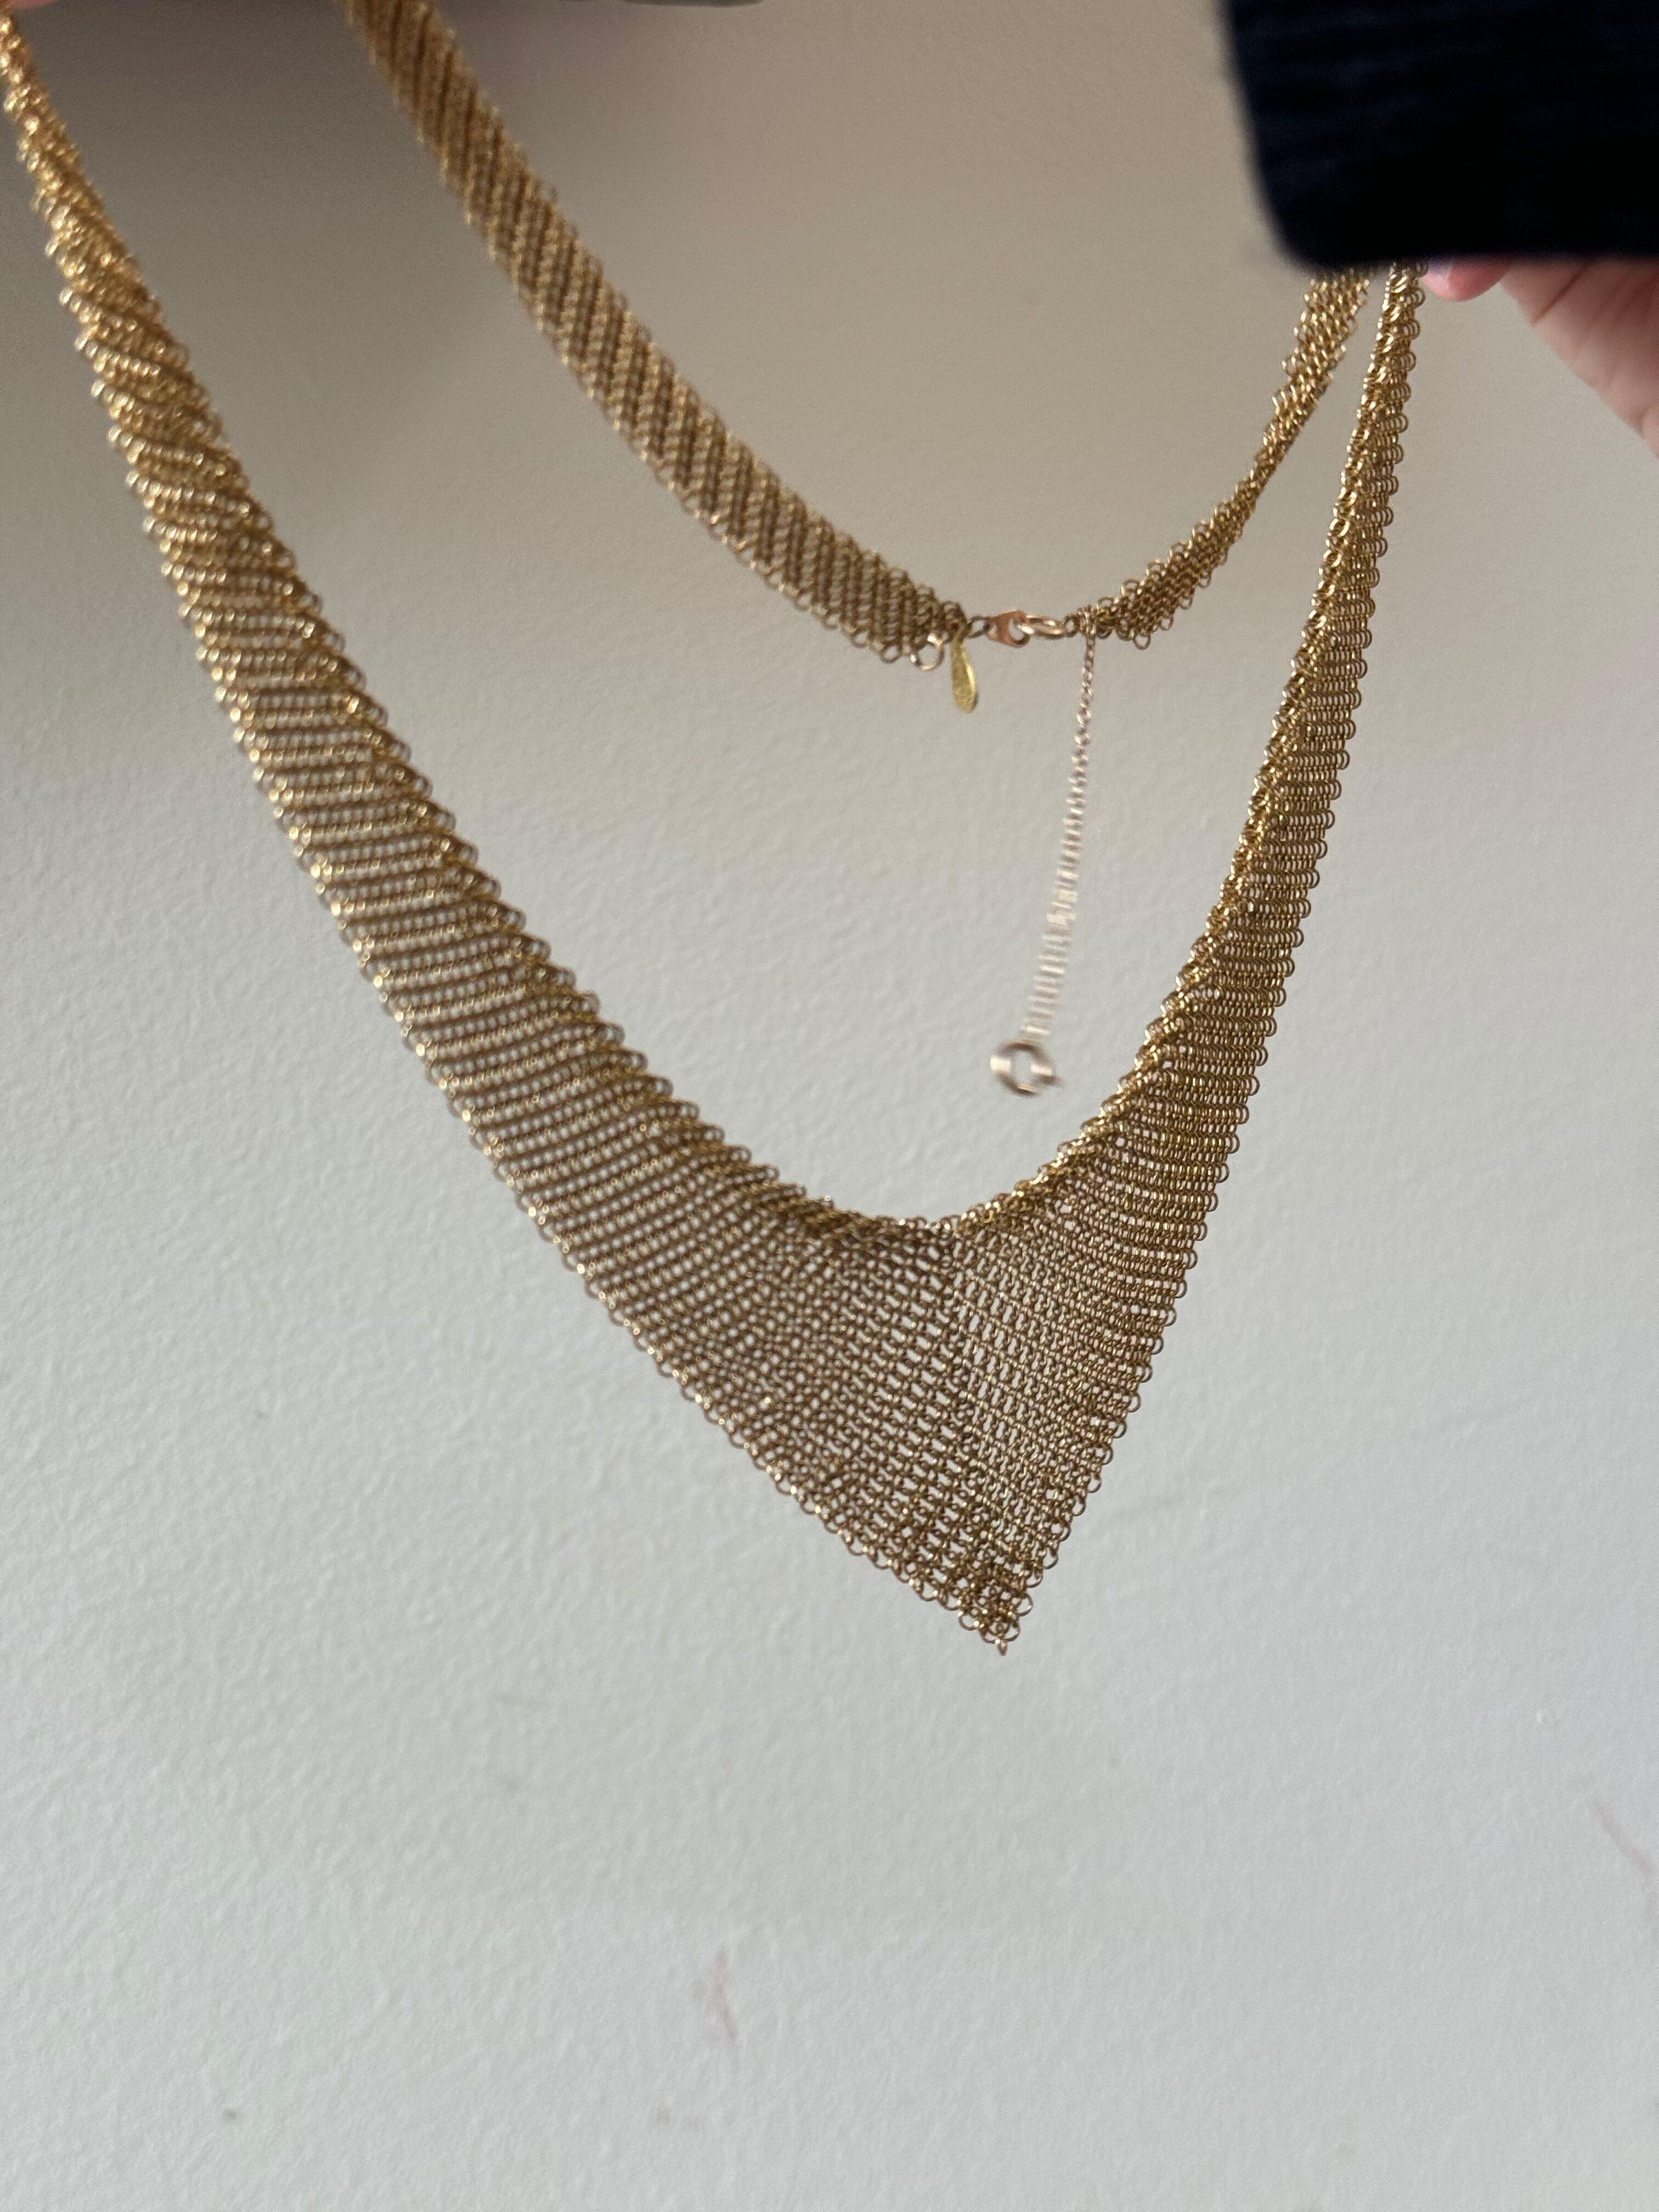 Elsa Peretti for Tiffany & Co Mesh Scarf Gold Necklace In Excellent Condition For Sale In New York, NY